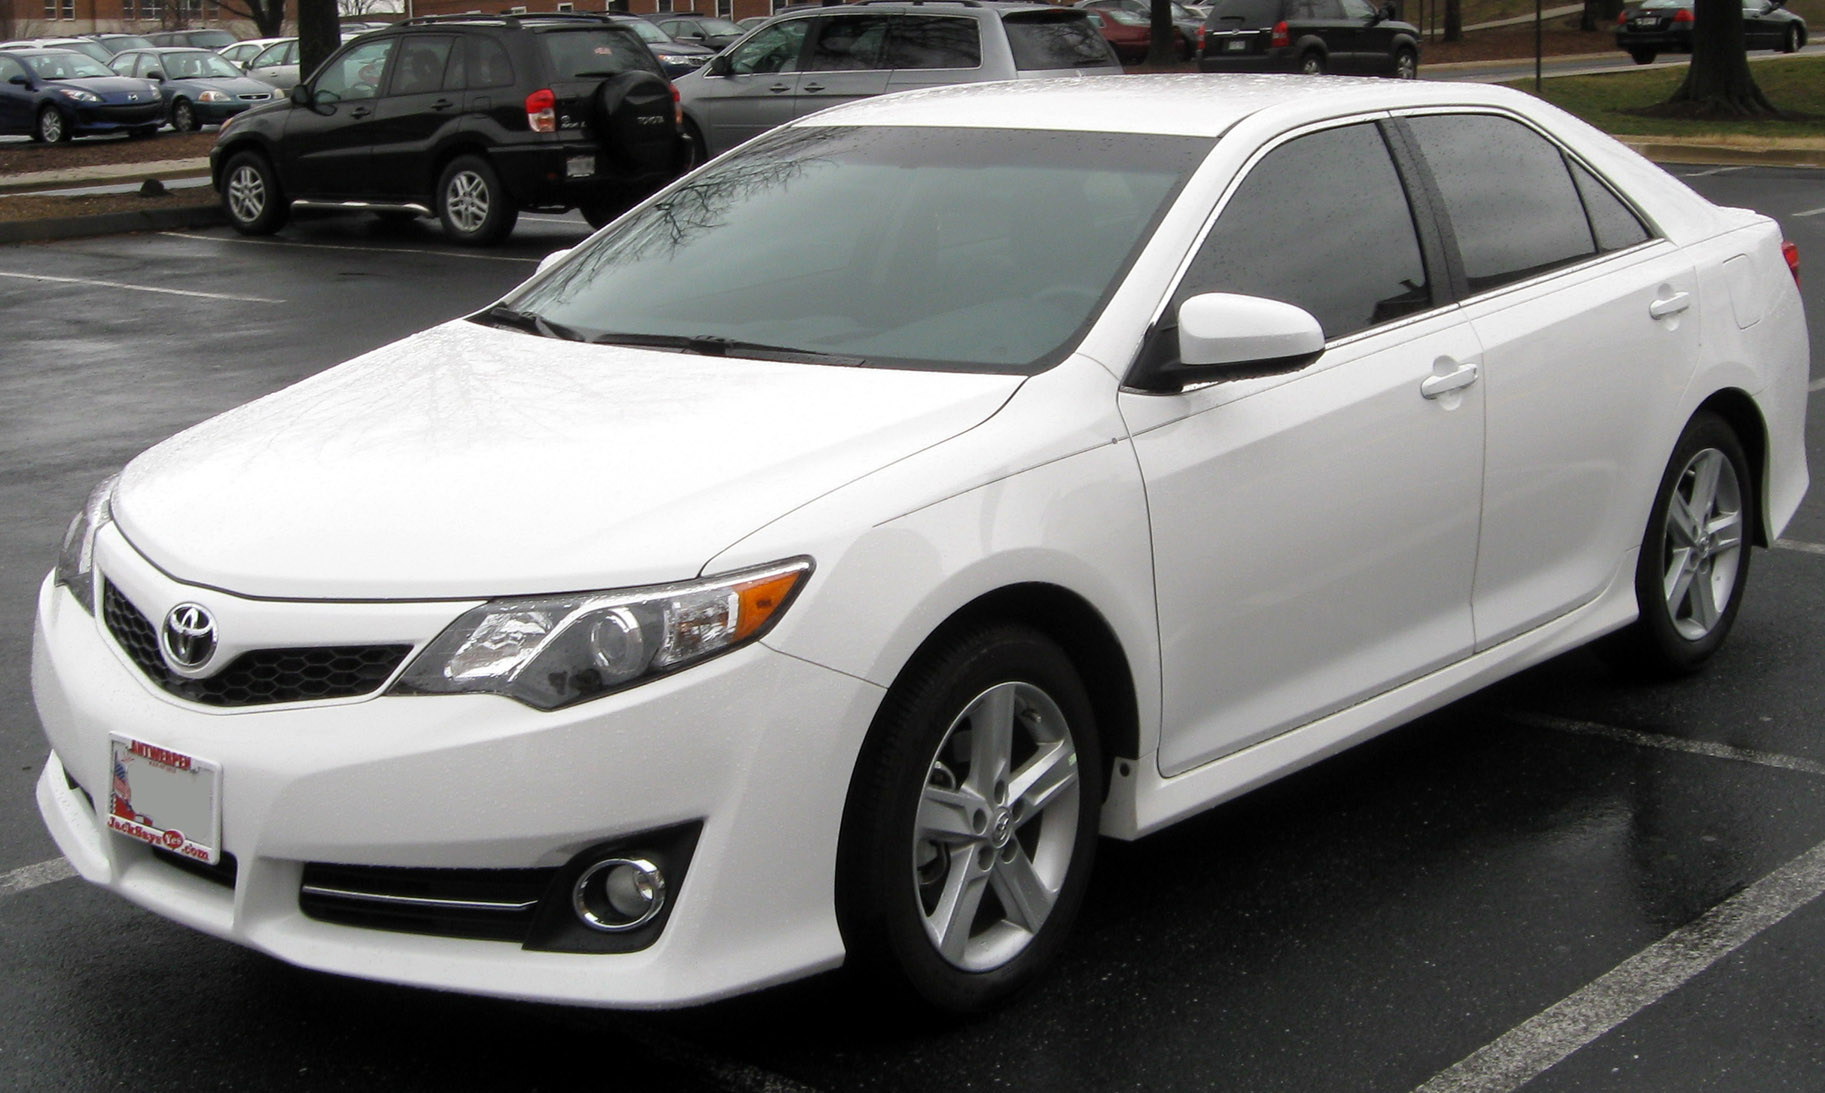 White Toyota Camry, best selling car in the United States image - Free ...